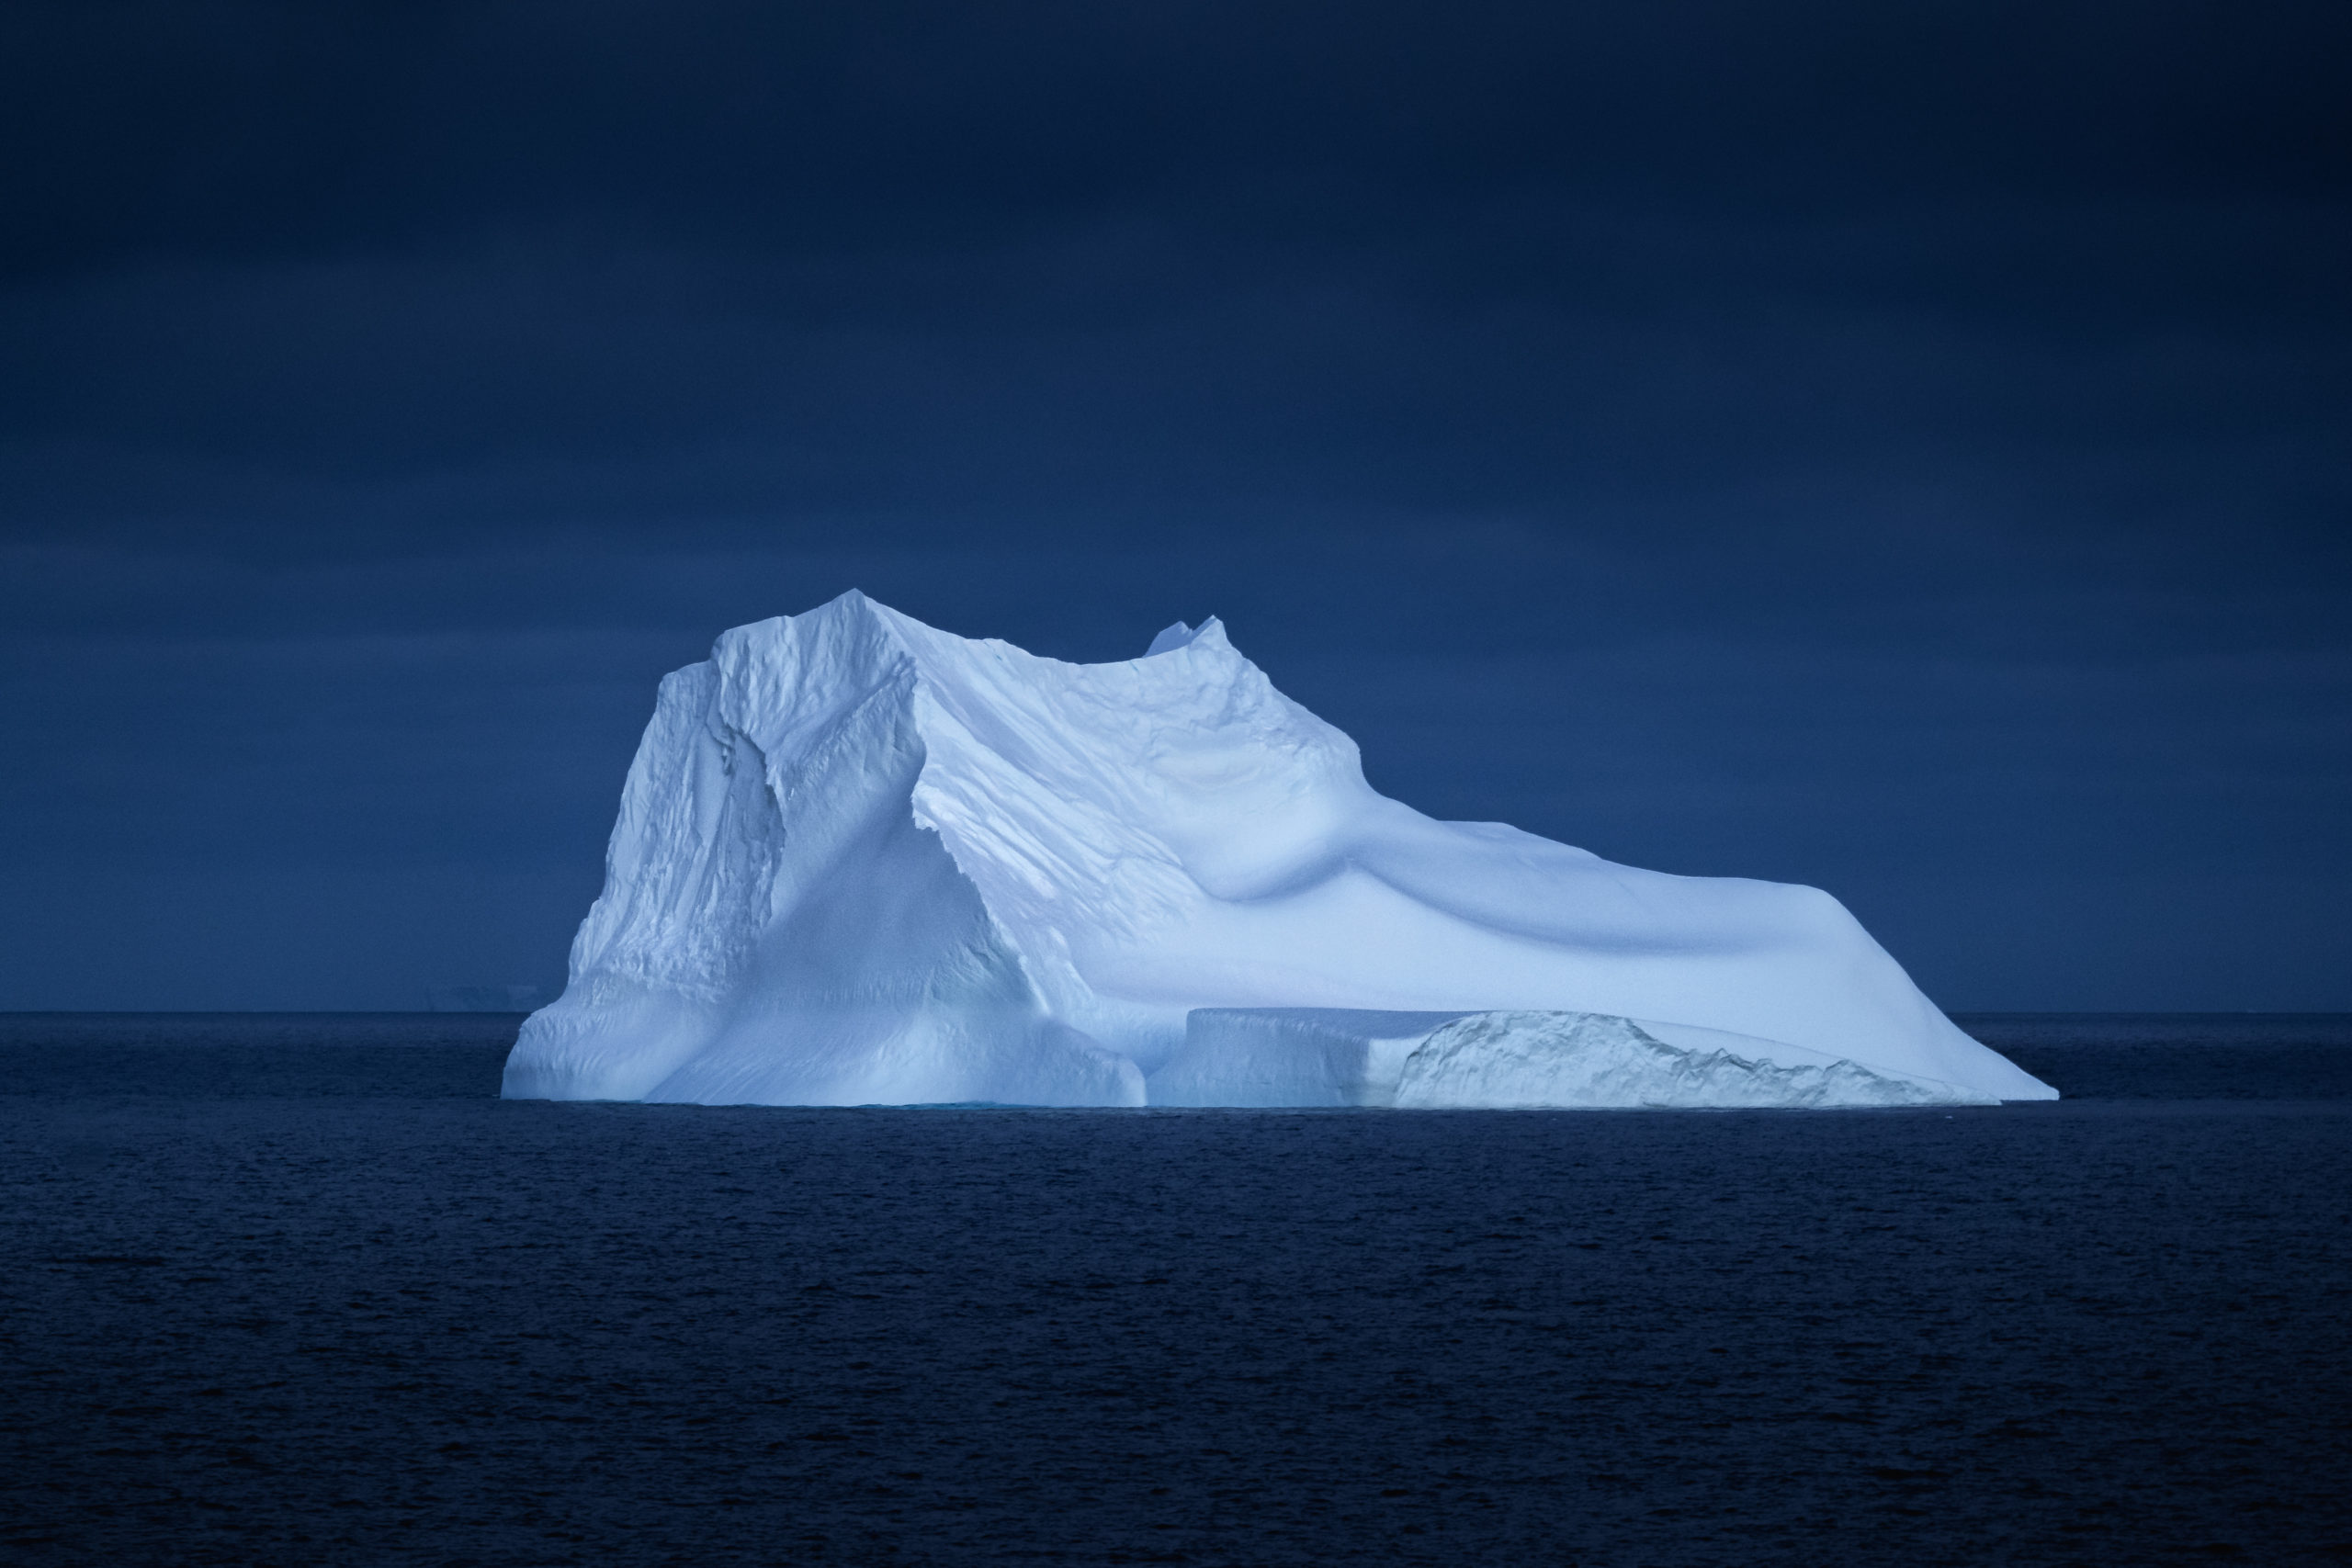 Landscape photography of a large Iceberg floating in the Antarctic sea at night